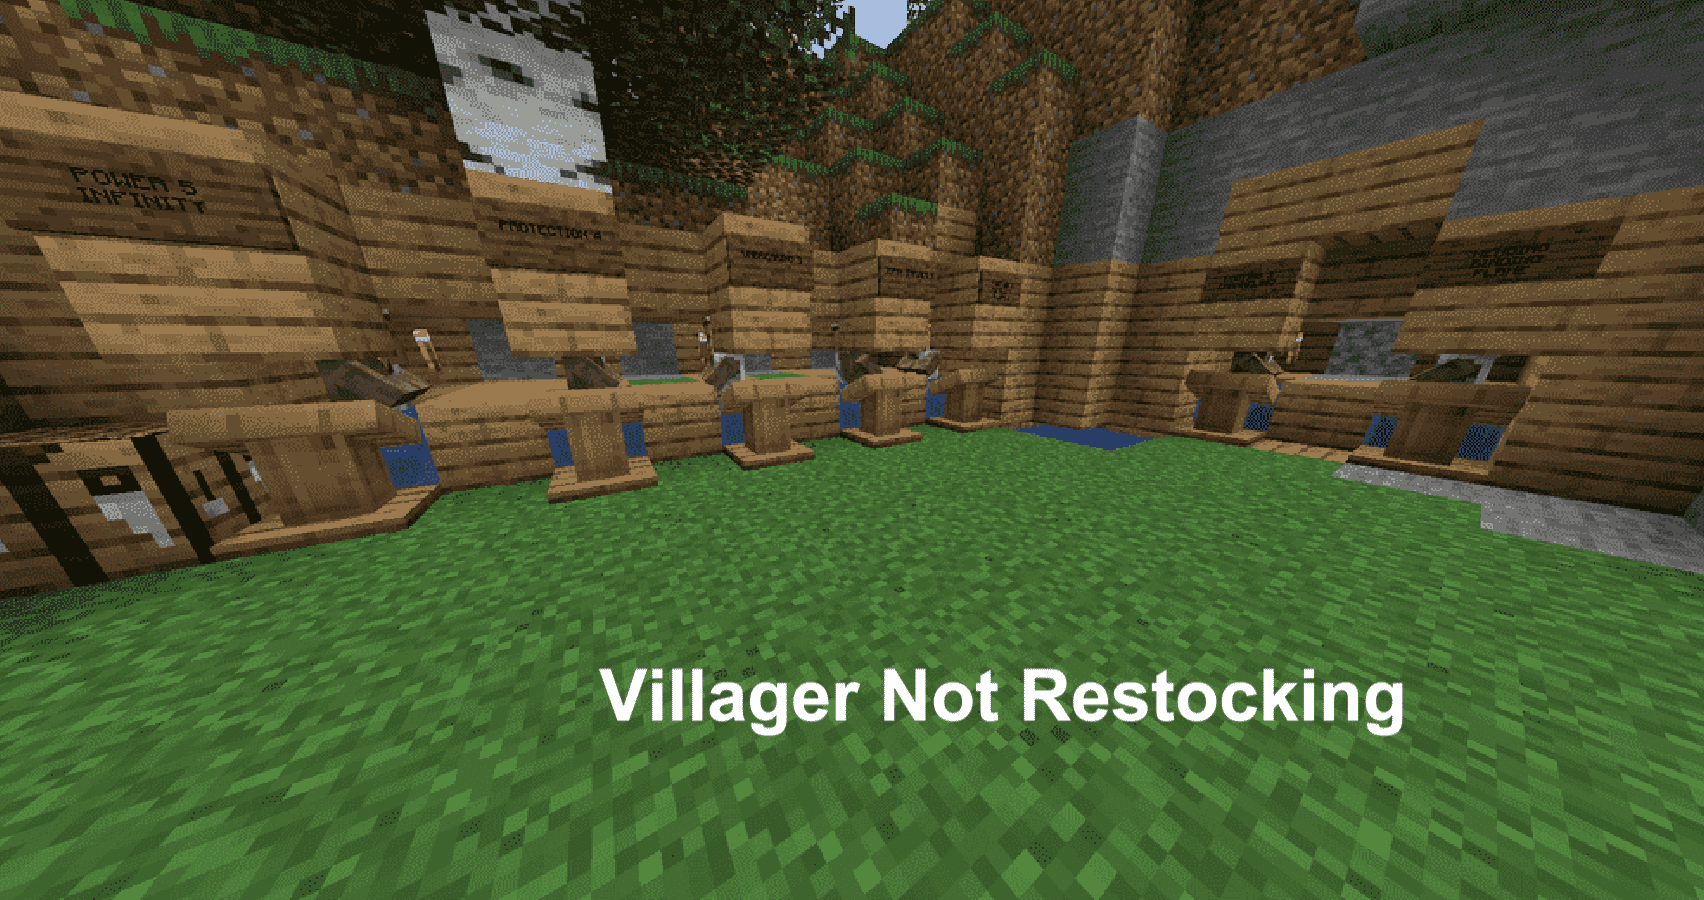 Minecraft Villager Not Restocking: What’s The Reason?